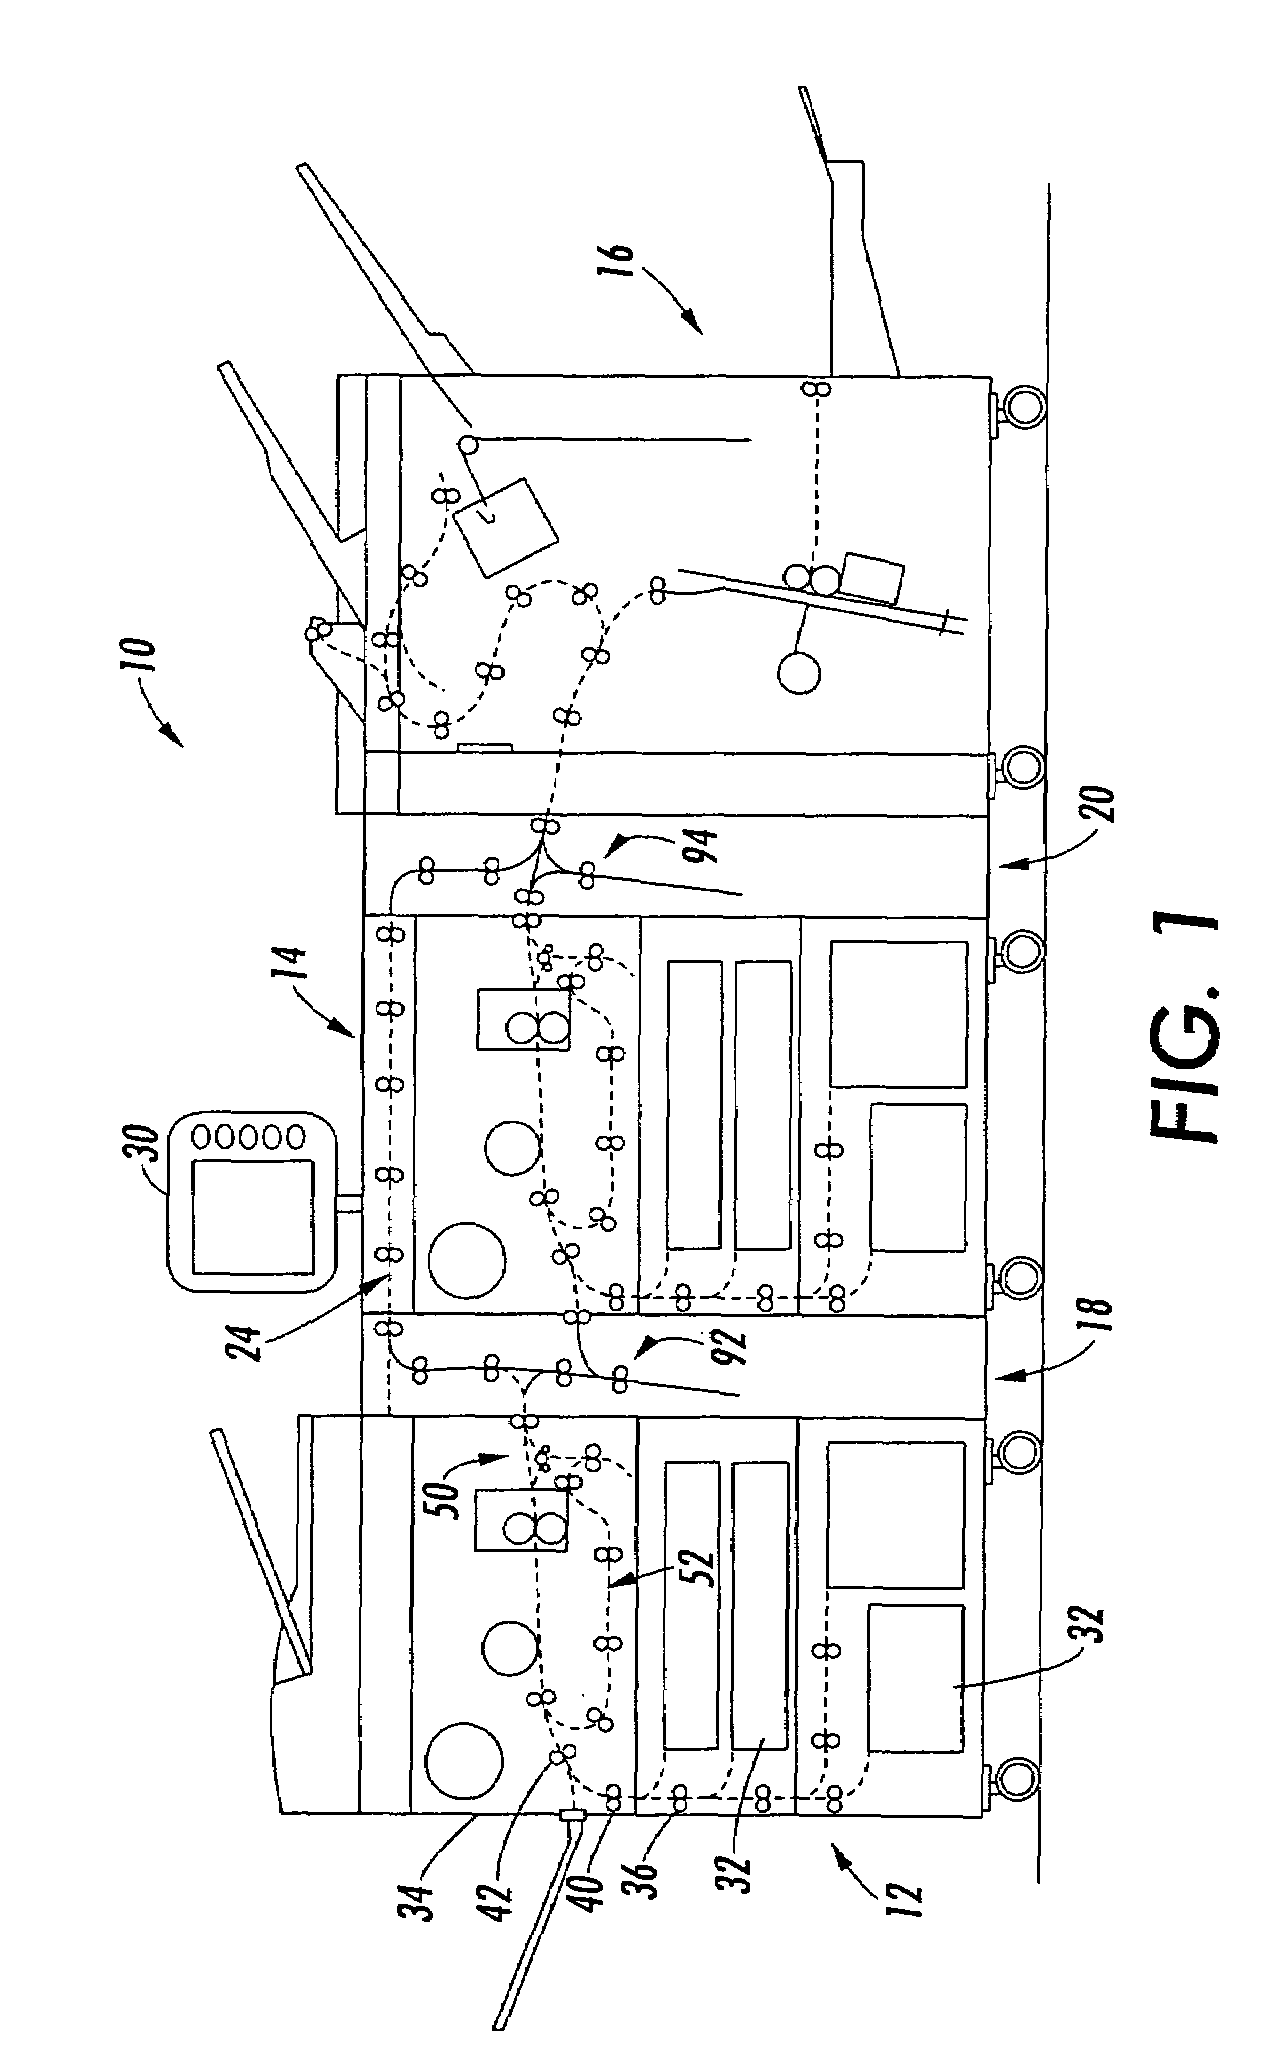 Printing system with inverter disposed for media velocity buffering and registration